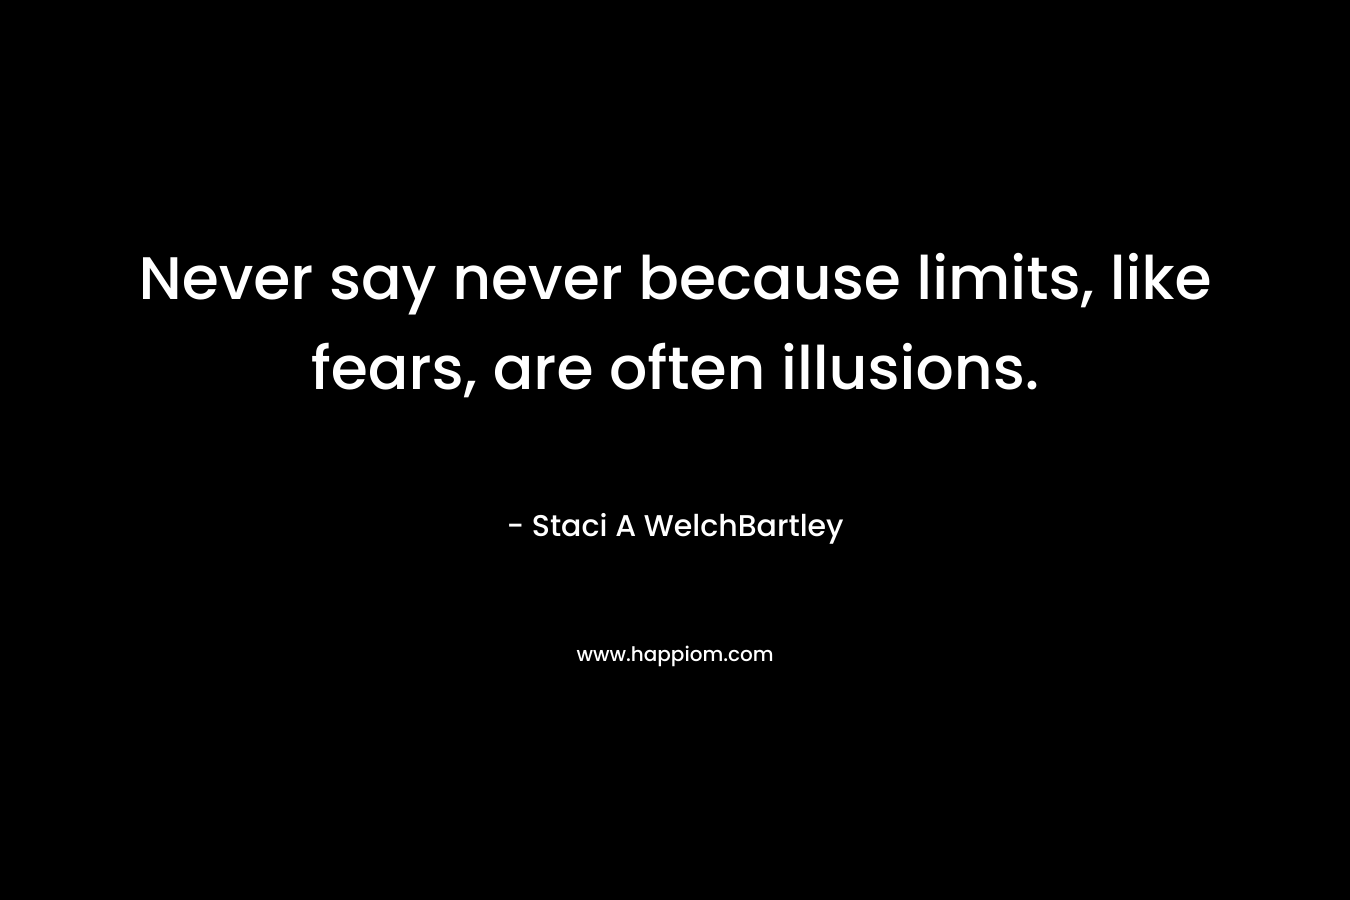 Never say never because limits, like fears, are often illusions.